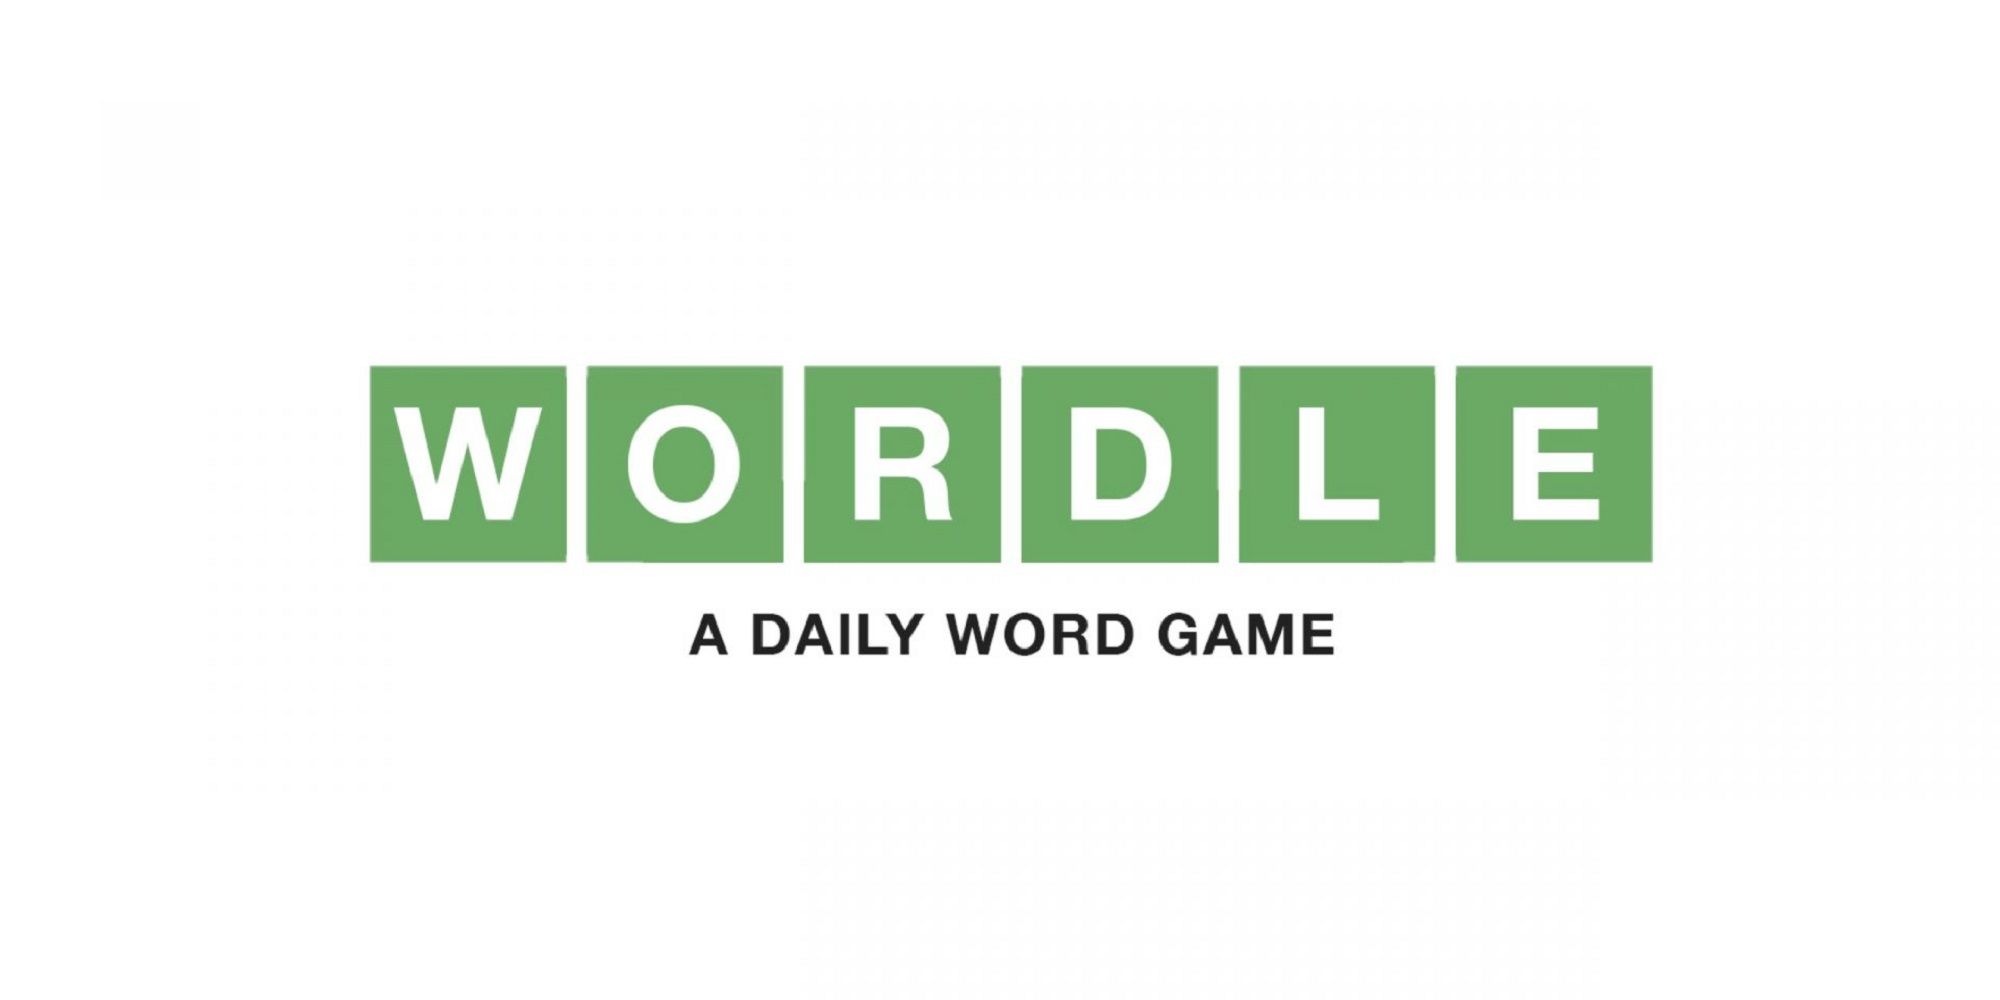 The official Wordle logo